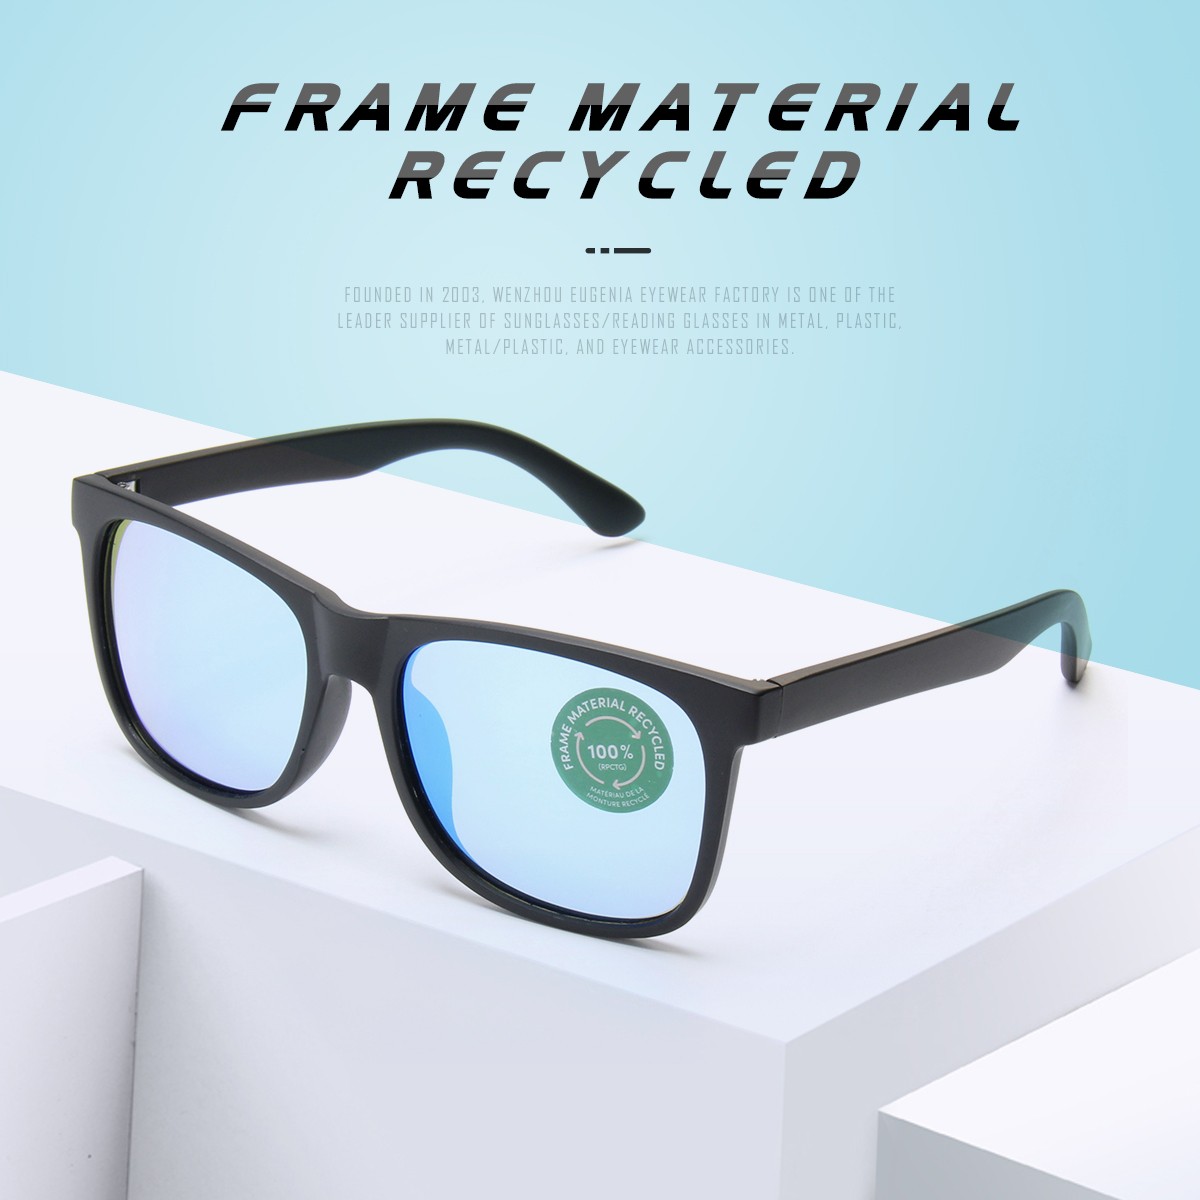 worldwide eco friendly sunglasses for recycle-1